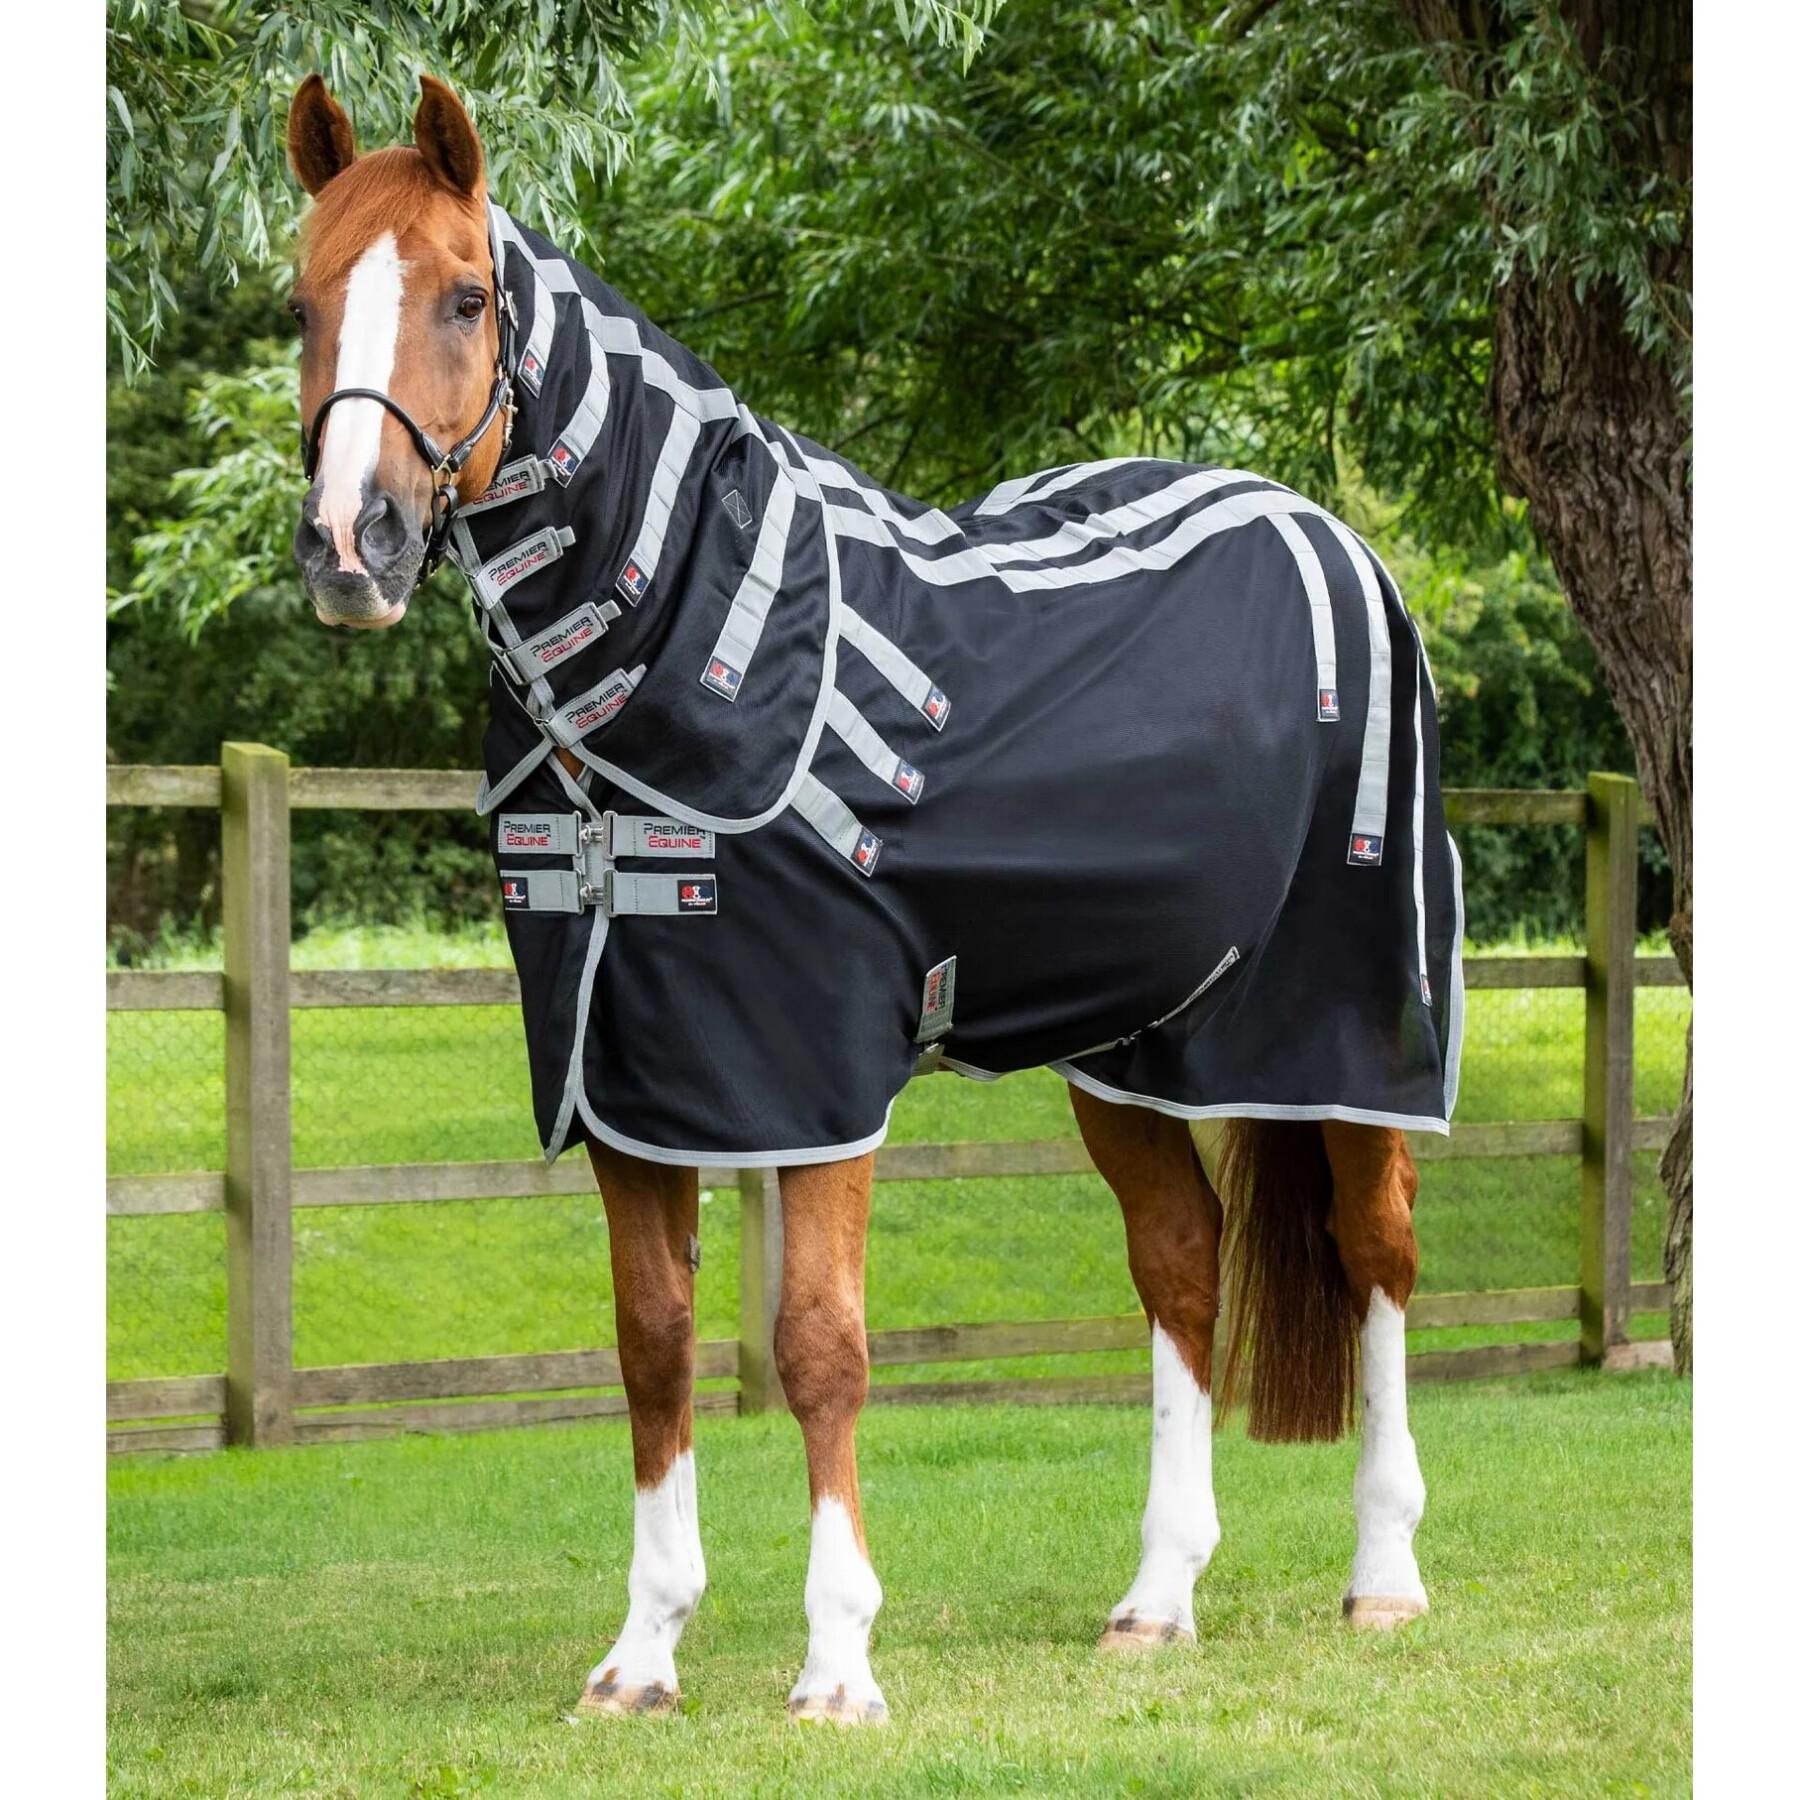 Outdoor magnetic horse blanket Premier Equine Magni-Teque - Outdoor Covers - Textile Horse equipment